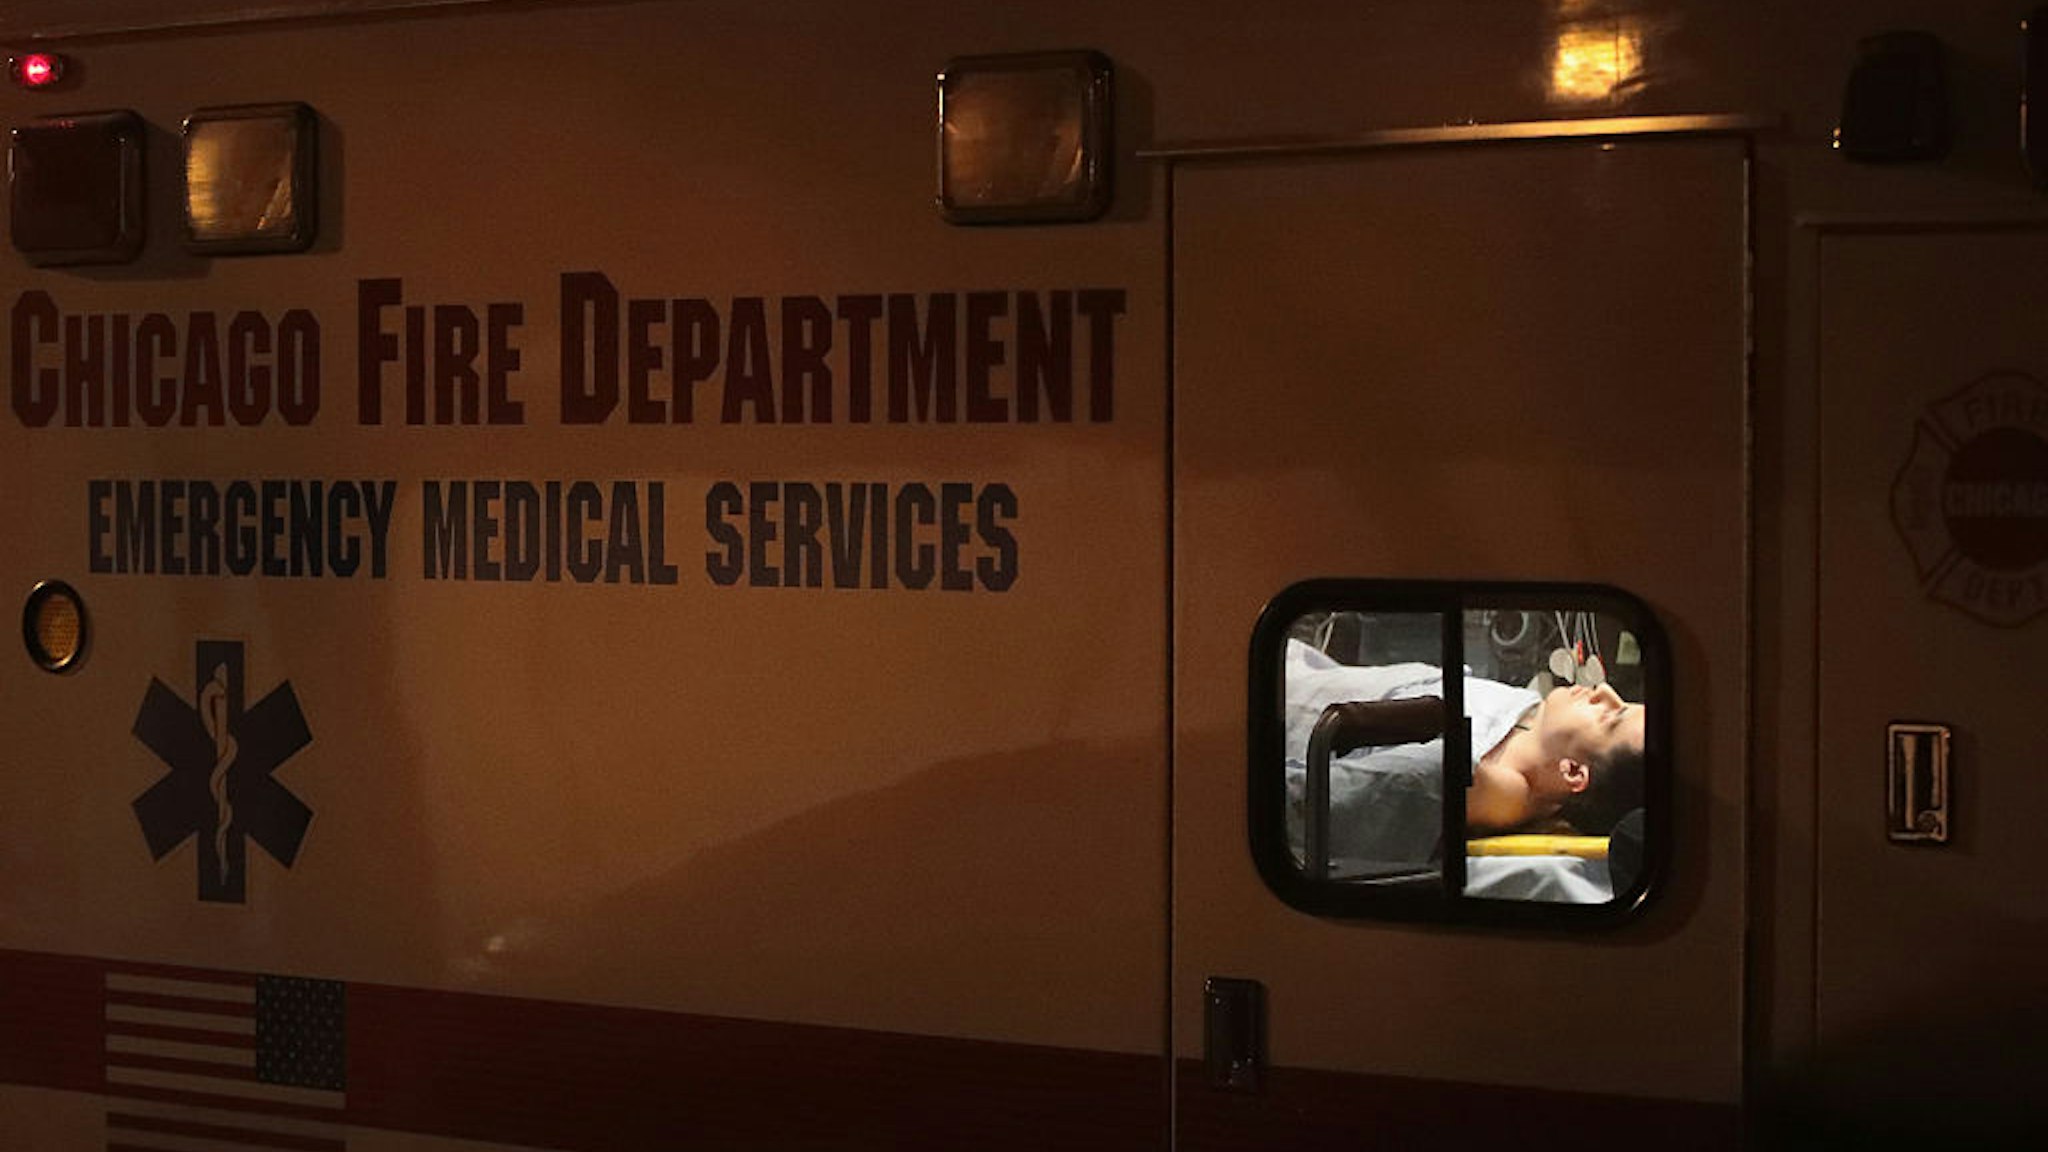 CHICAGO, IL - JANUARY 01: A man is pictured in an ambulance at the scene where two people were reported shot on January 1, 2017 in Chicago, Illinois. Chicago ended 2016 with more than 700 people shot and killed, making it one of the deadliest years in two decades. (Photo by Scott Olson/Getty Images)